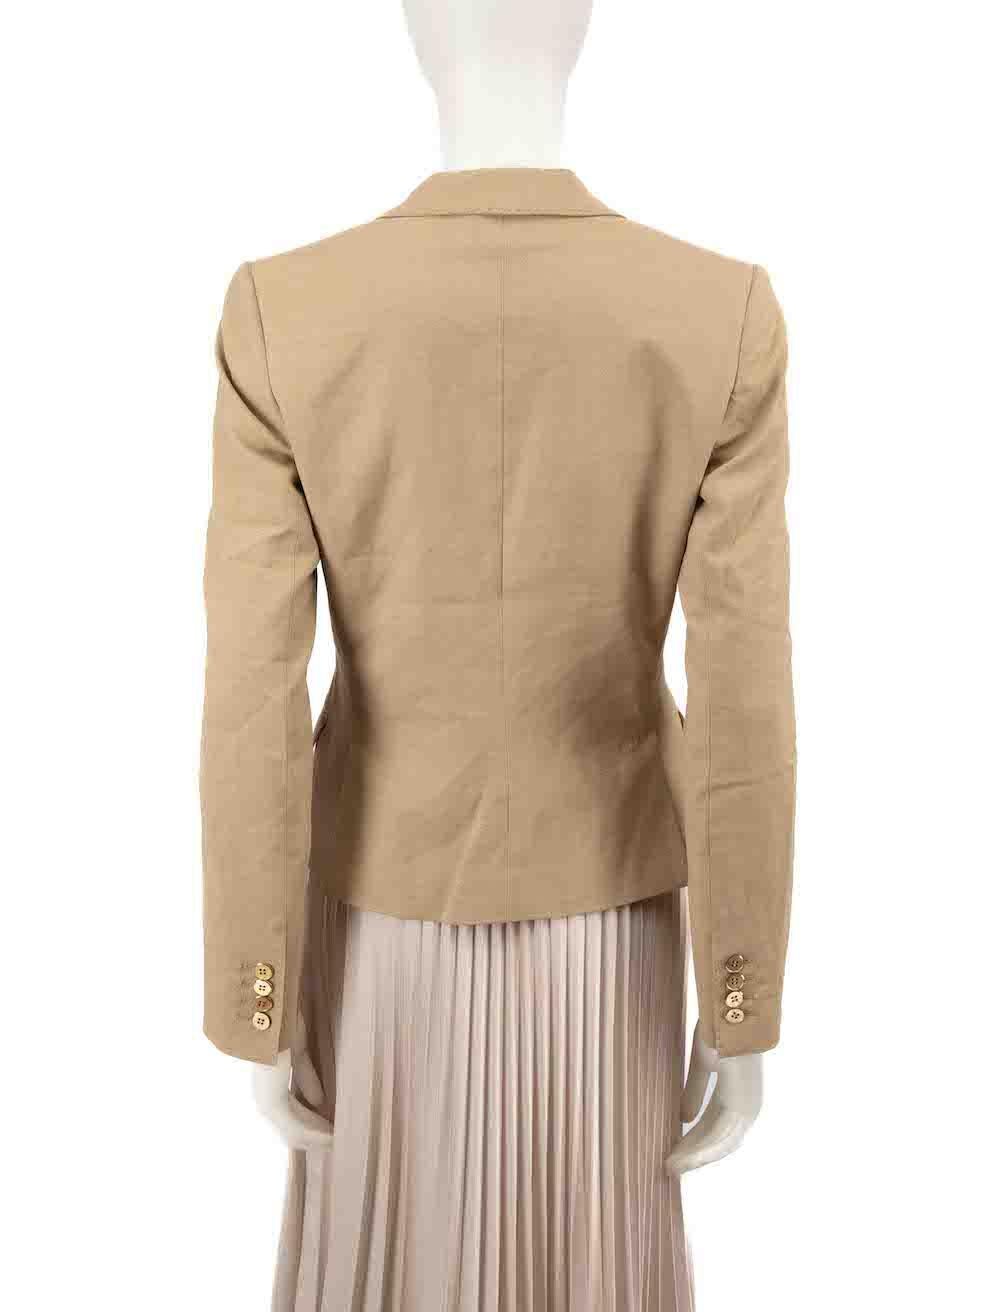 Dolce & Gabbana Beige Single Breasted Tailored Blazer Jacket Size S In Excellent Condition For Sale In London, GB